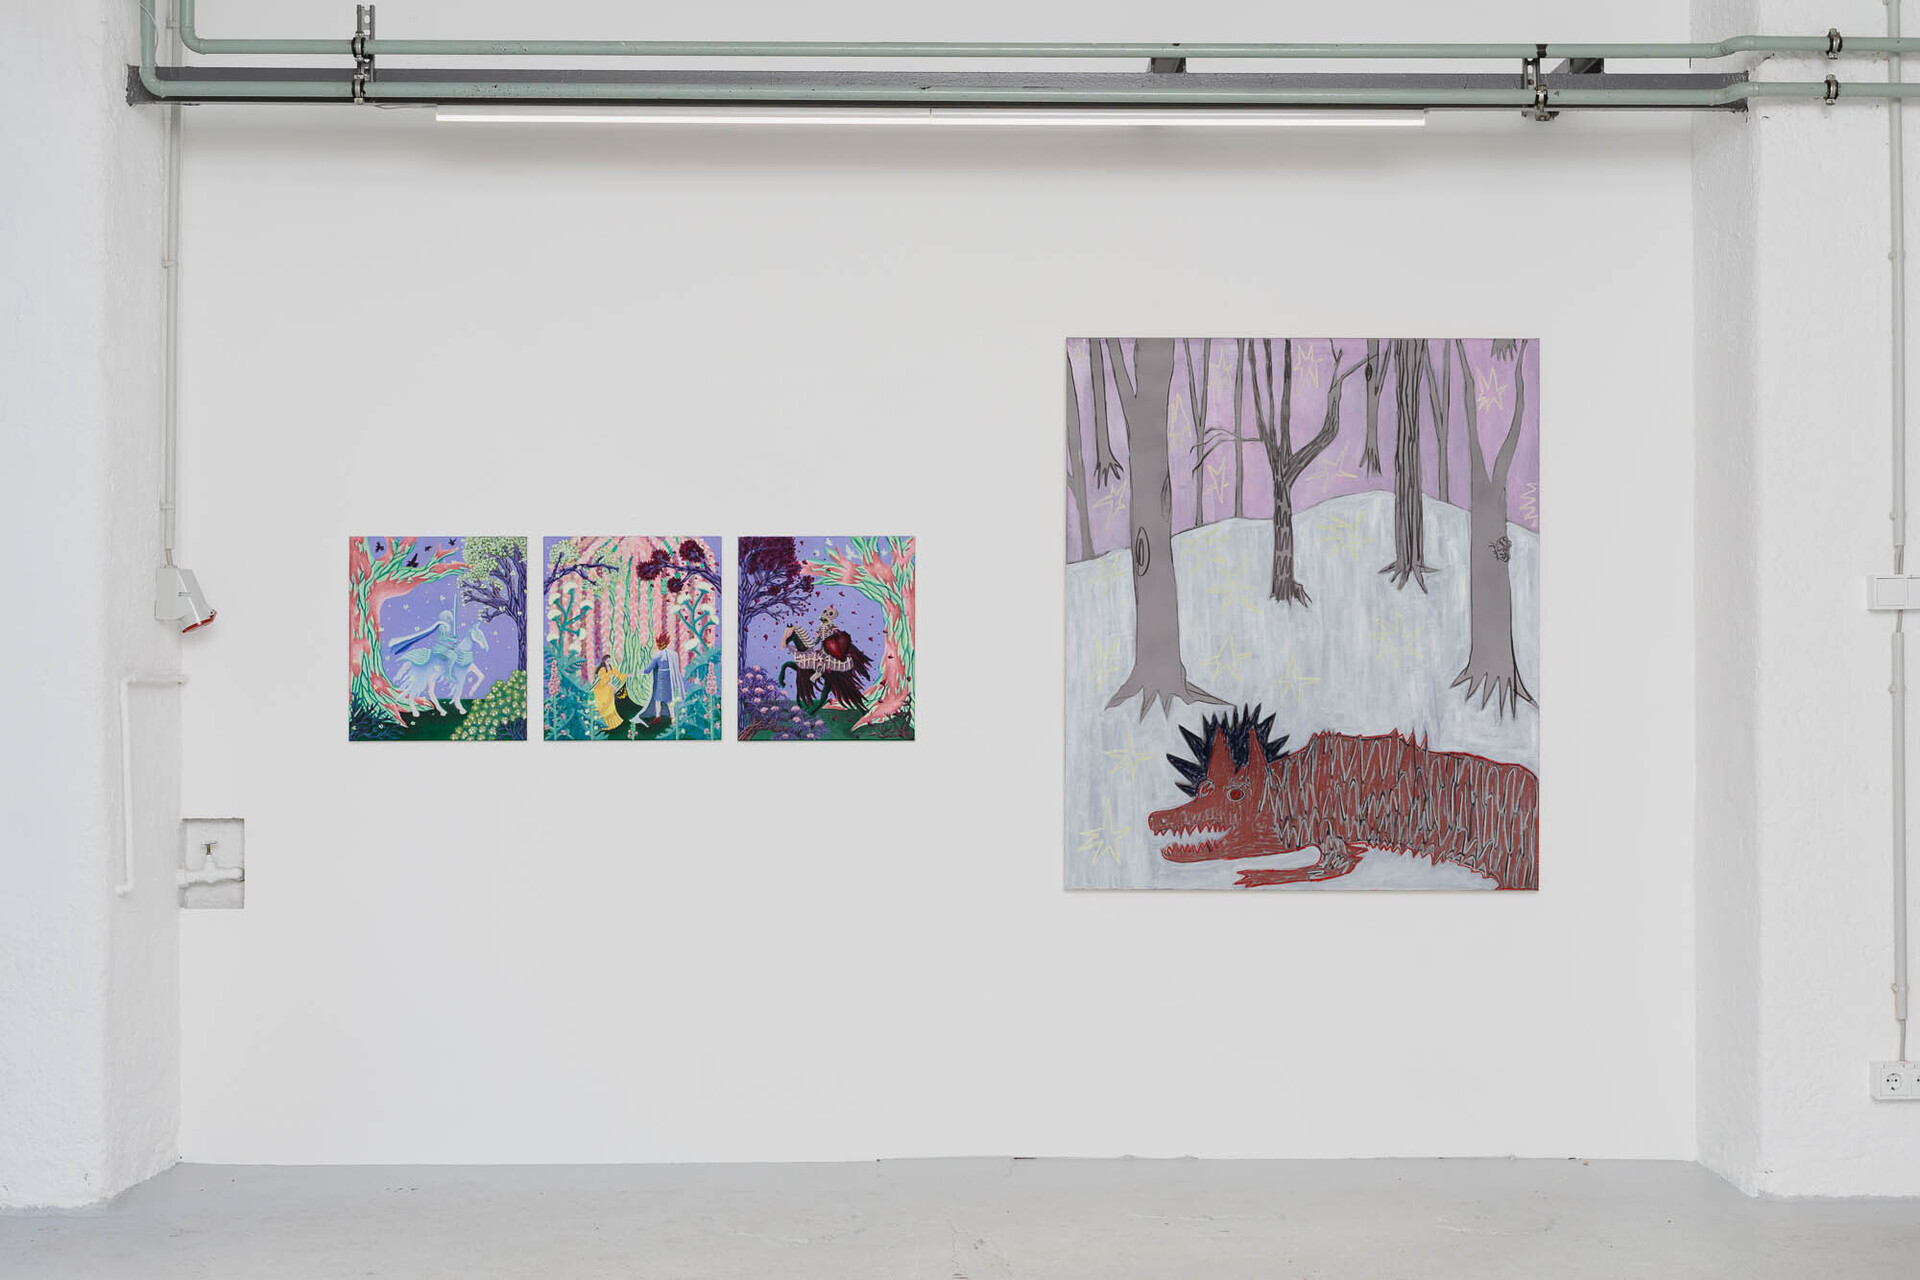 Jimmy Vuong, Vermählung ohne die Gunst der Anderen, 52x 135 cm, Oil on canvas, 2022; Boris Saccone, Heiliges Biest, 140 x 120 cm, Oil, charcoal and pastel on canvas, 2022 (left to right)